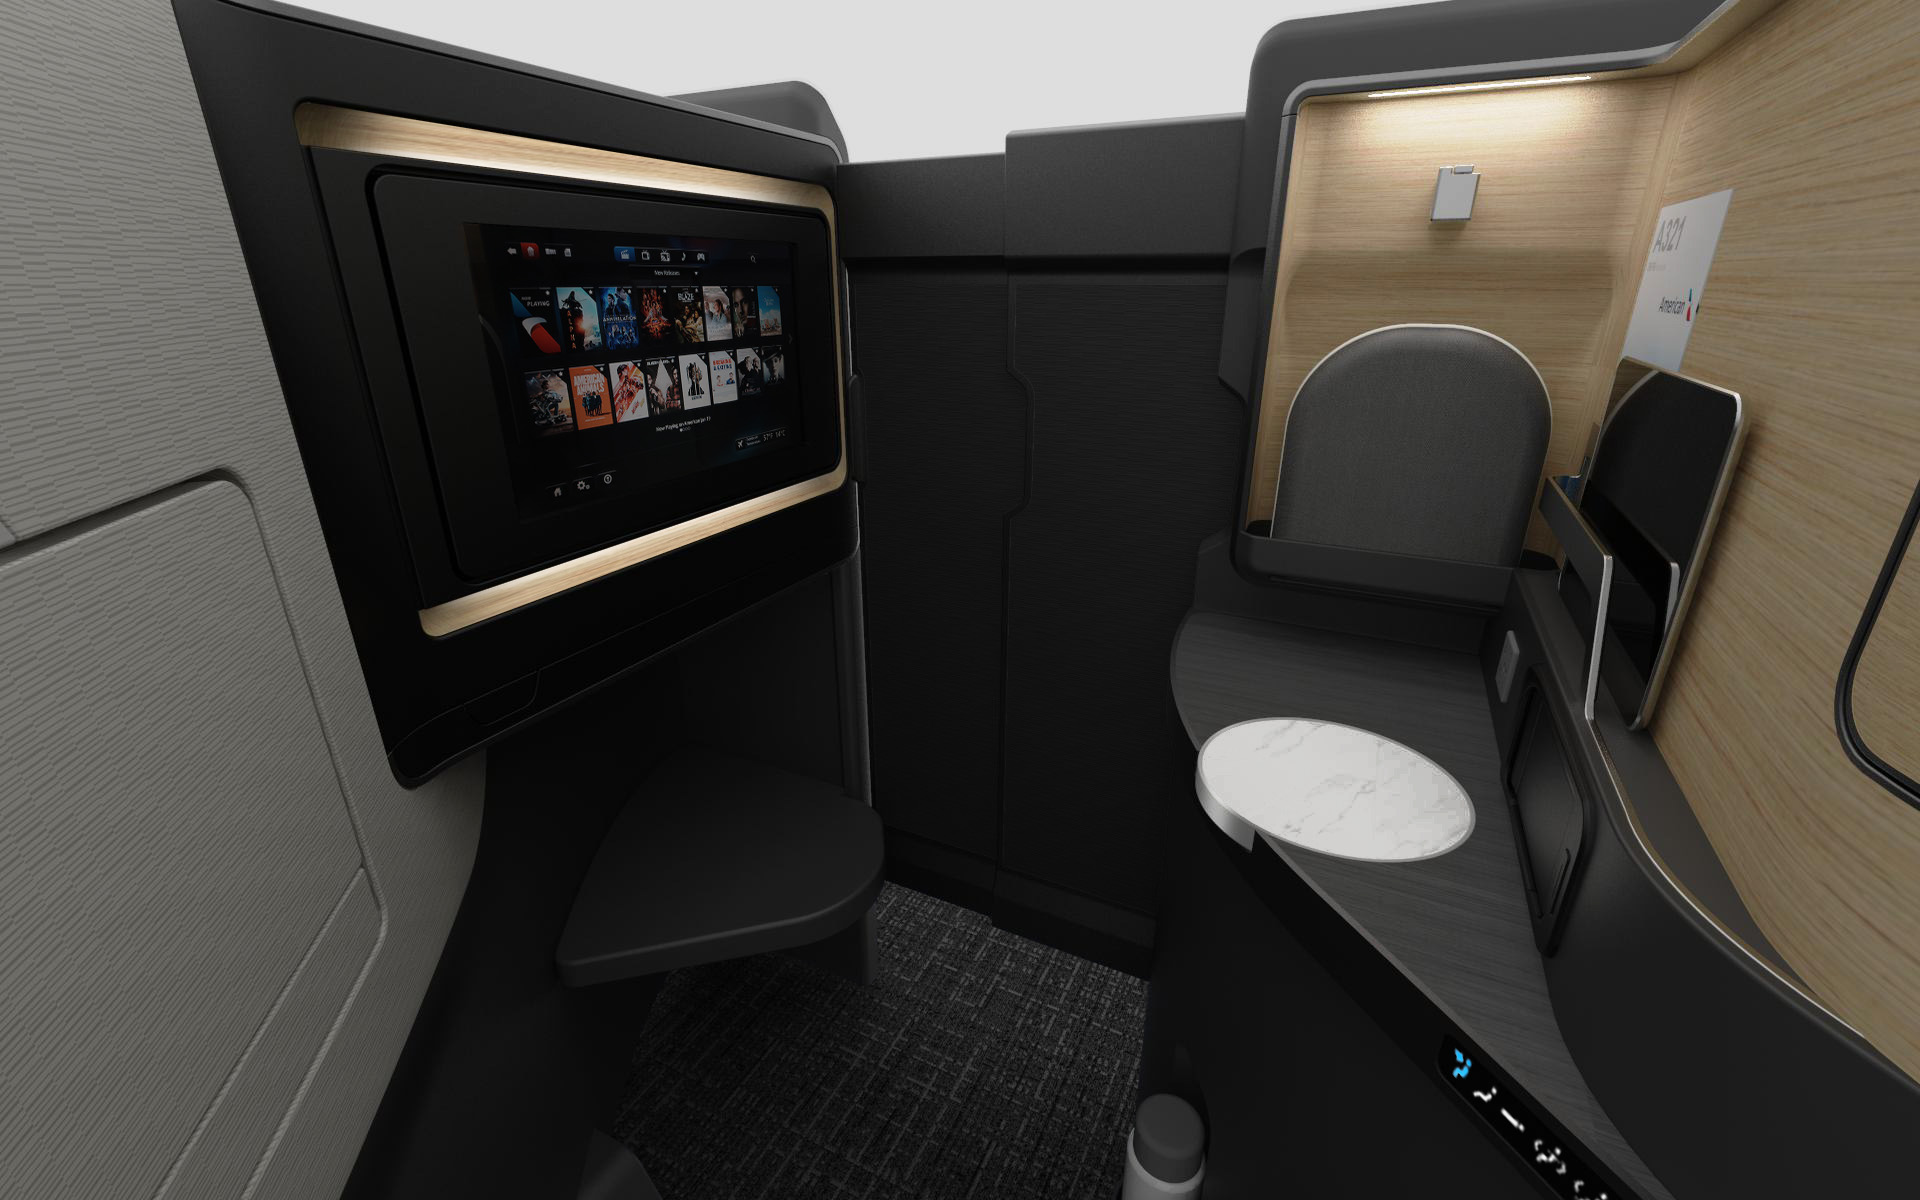 American Airlines introduces new business class: Flagship Suites